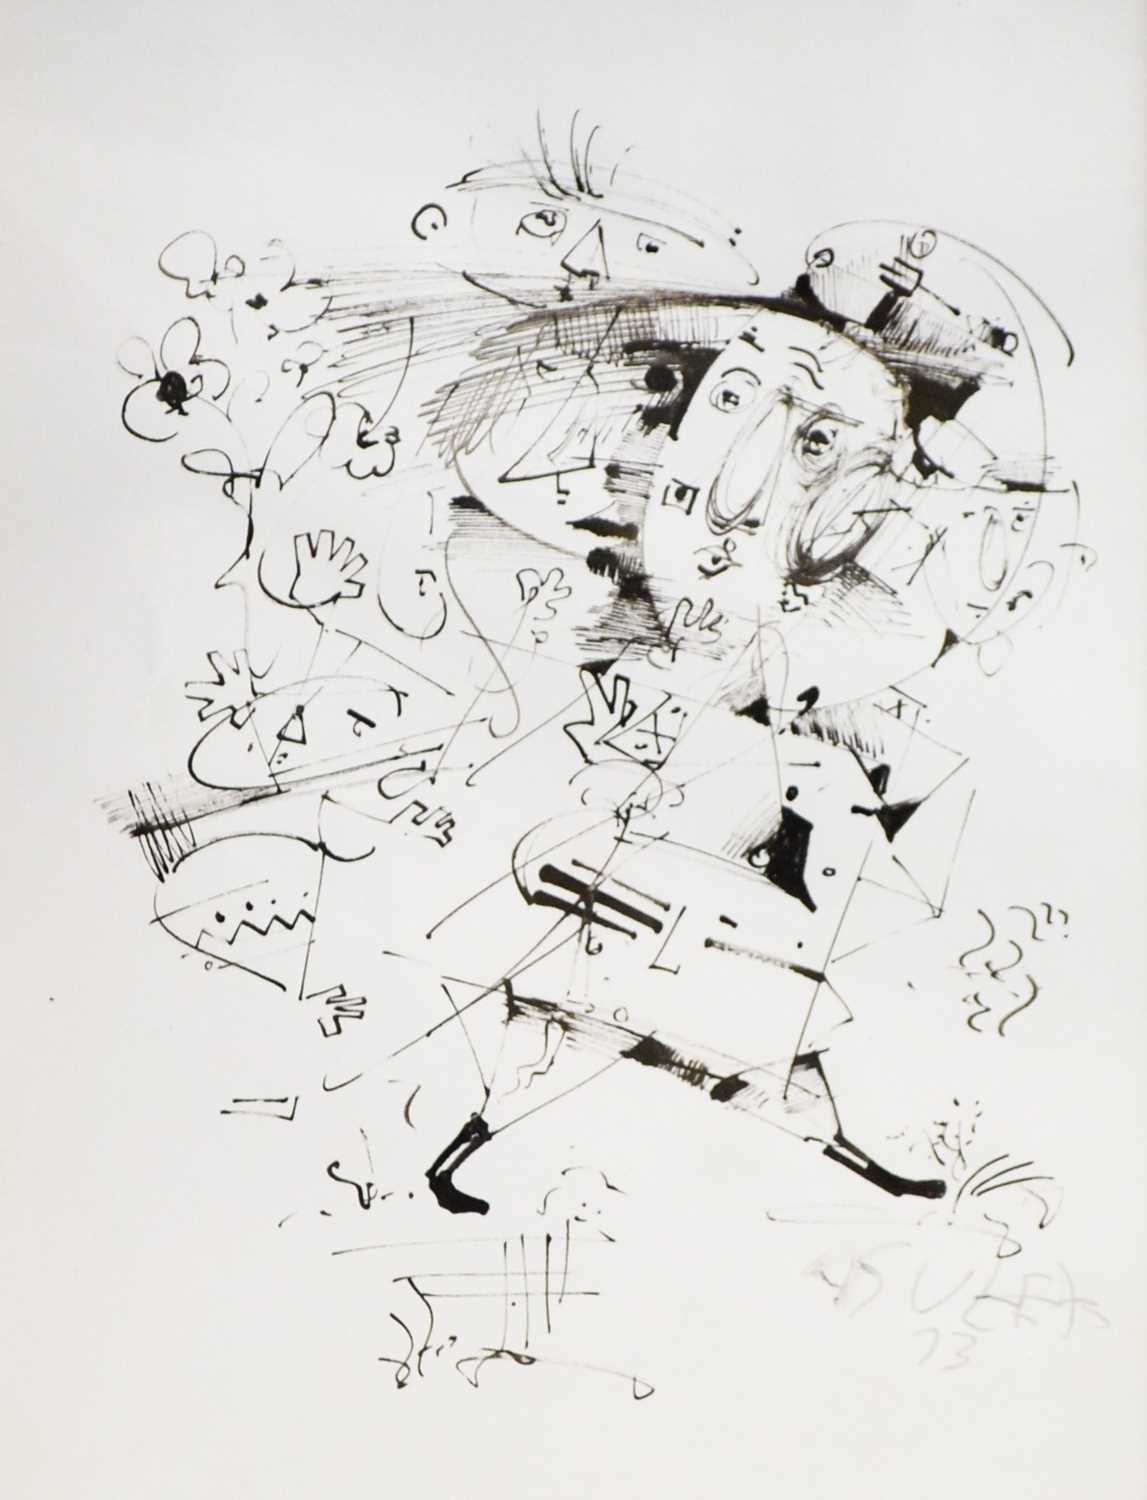 Lot 935 - Antoni Sulek - drawing in pen and ink.